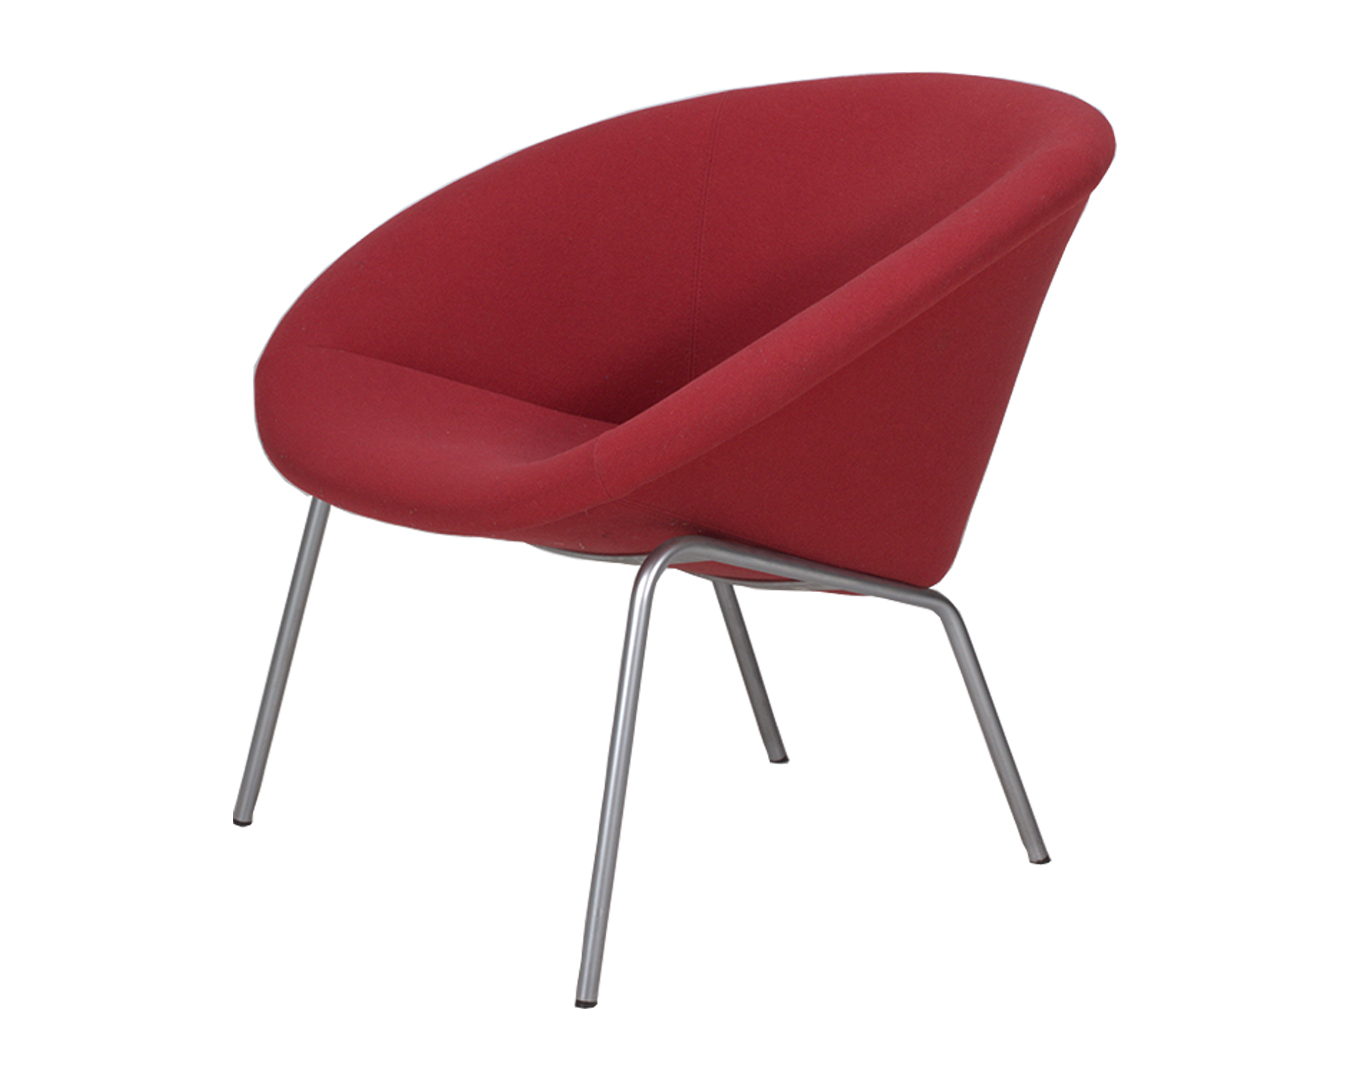 Walter Knoll Armchair 369 Loungesessel 